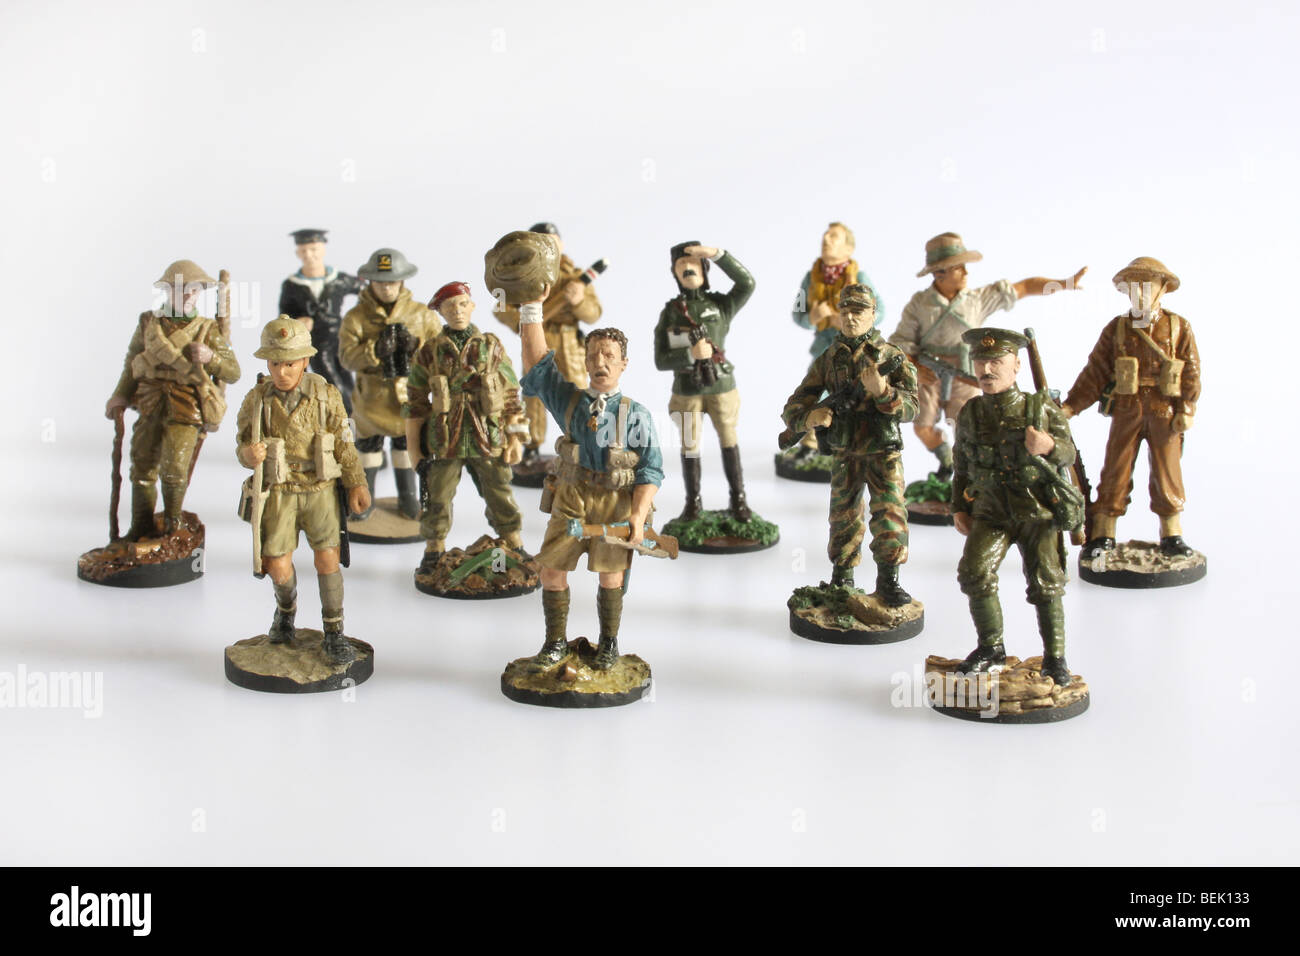 A collection of soldiers from the 20th century, all fighting for the British Empire. Collectible Franklin Mint soldiers. Stock Photo